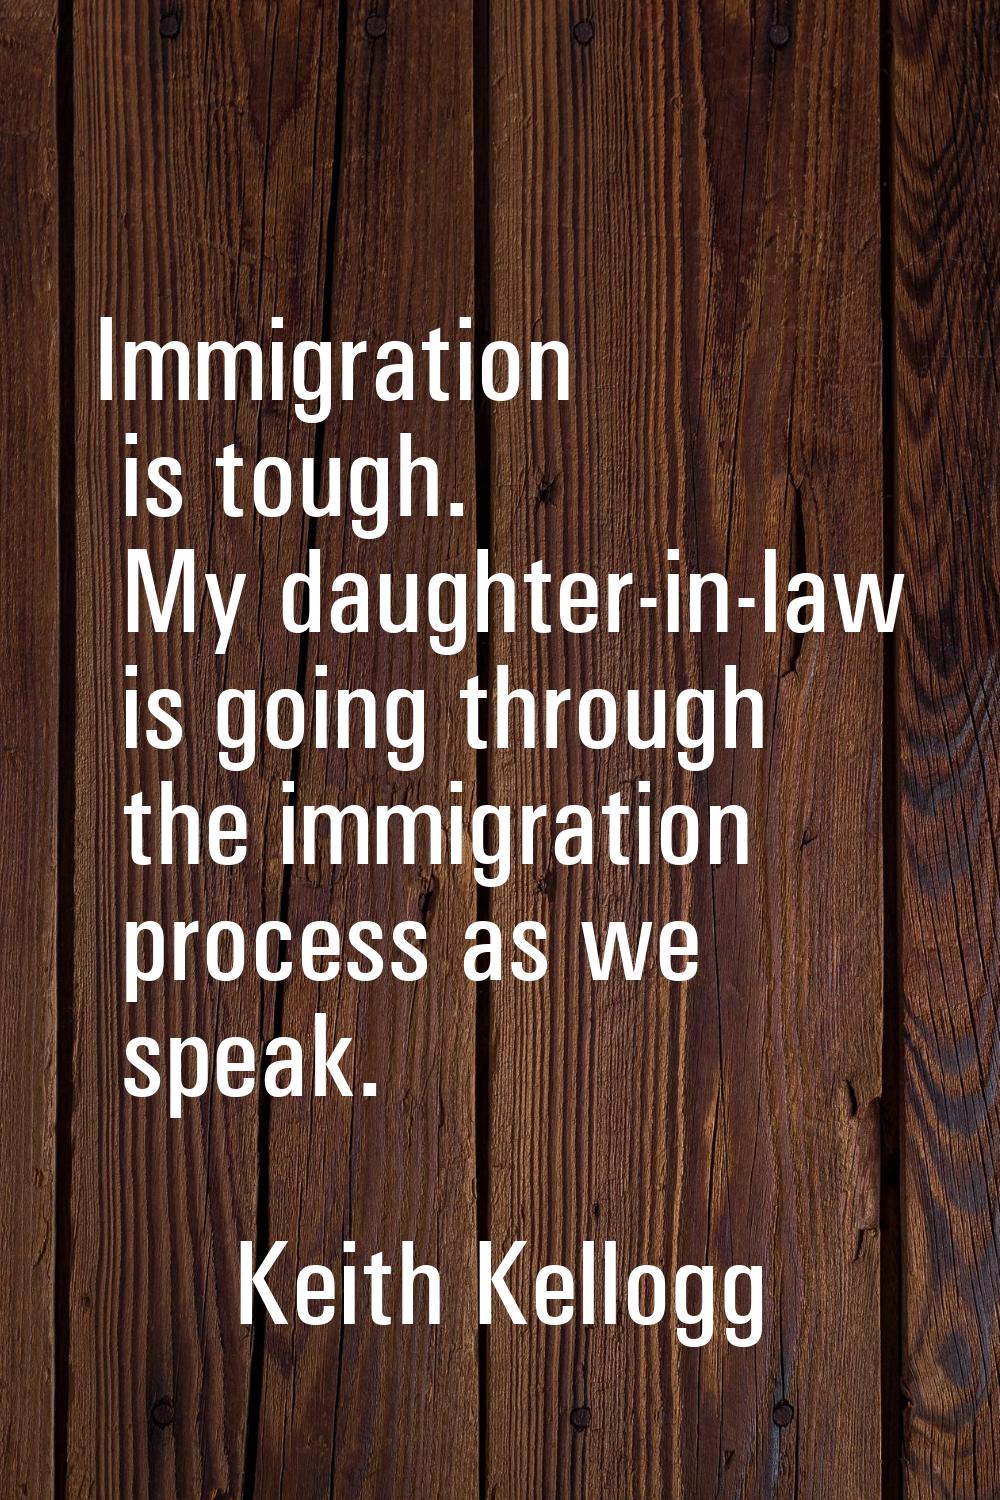 Immigration is tough. My daughter-in-law is going through the immigration process as we speak.